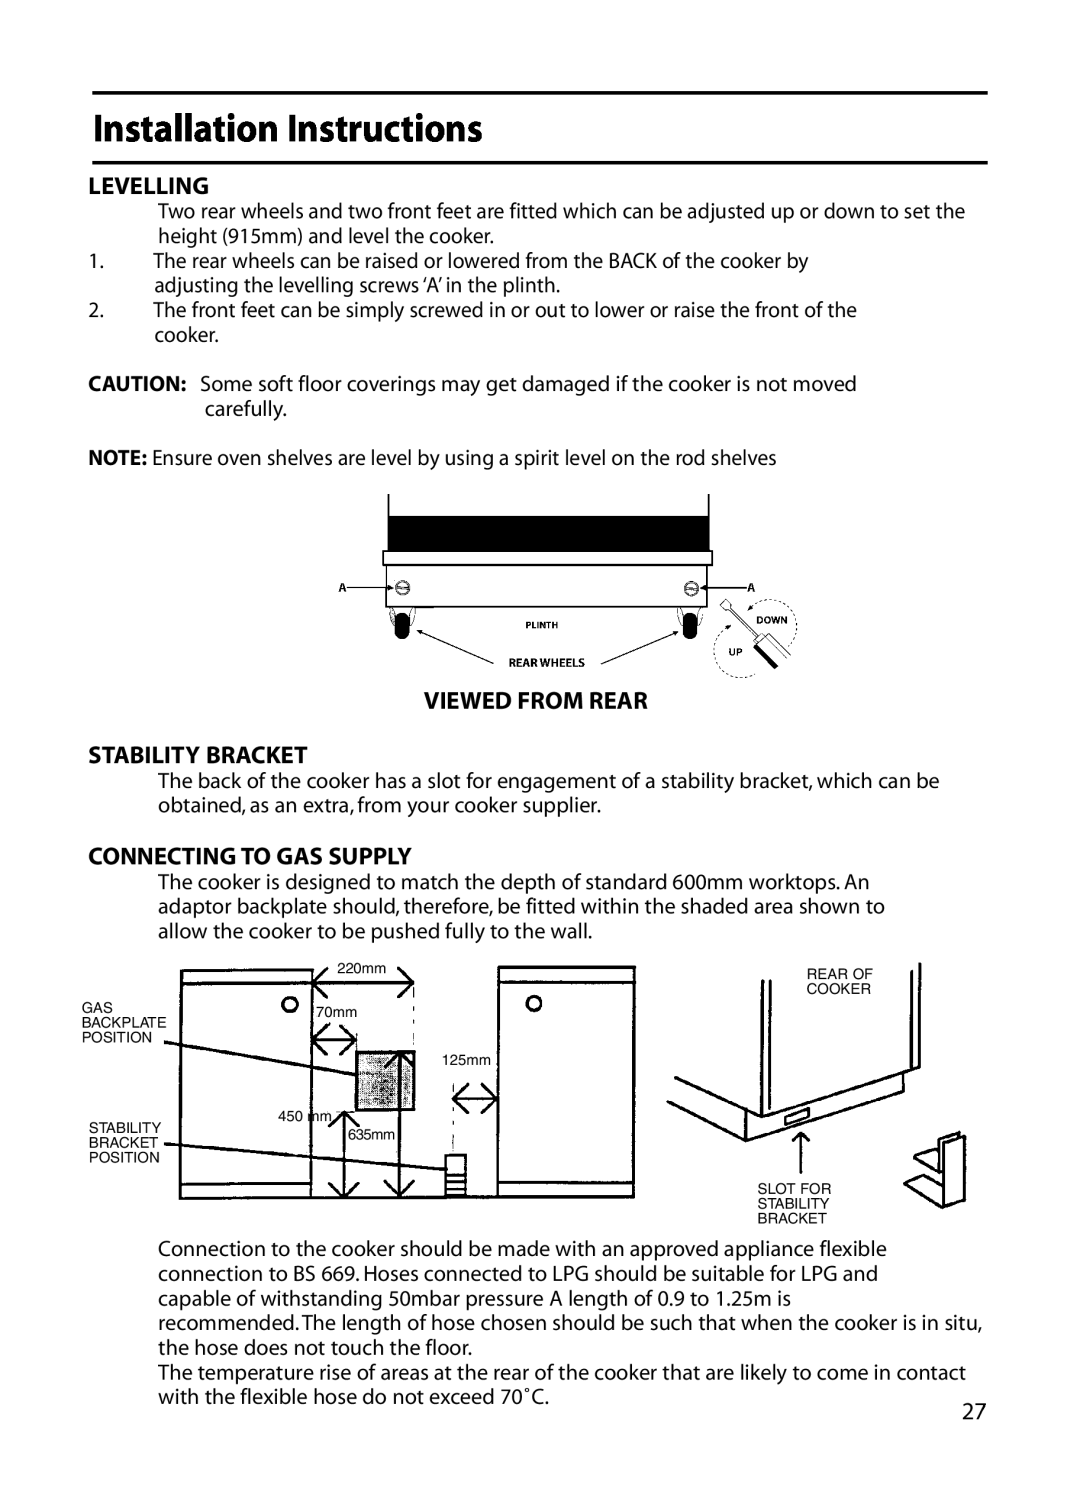 Indesit KD641E, KD643E Installation Instructions, Levelling, Viewed From Rear Stability Bracket, Connecting To Gas Supply 